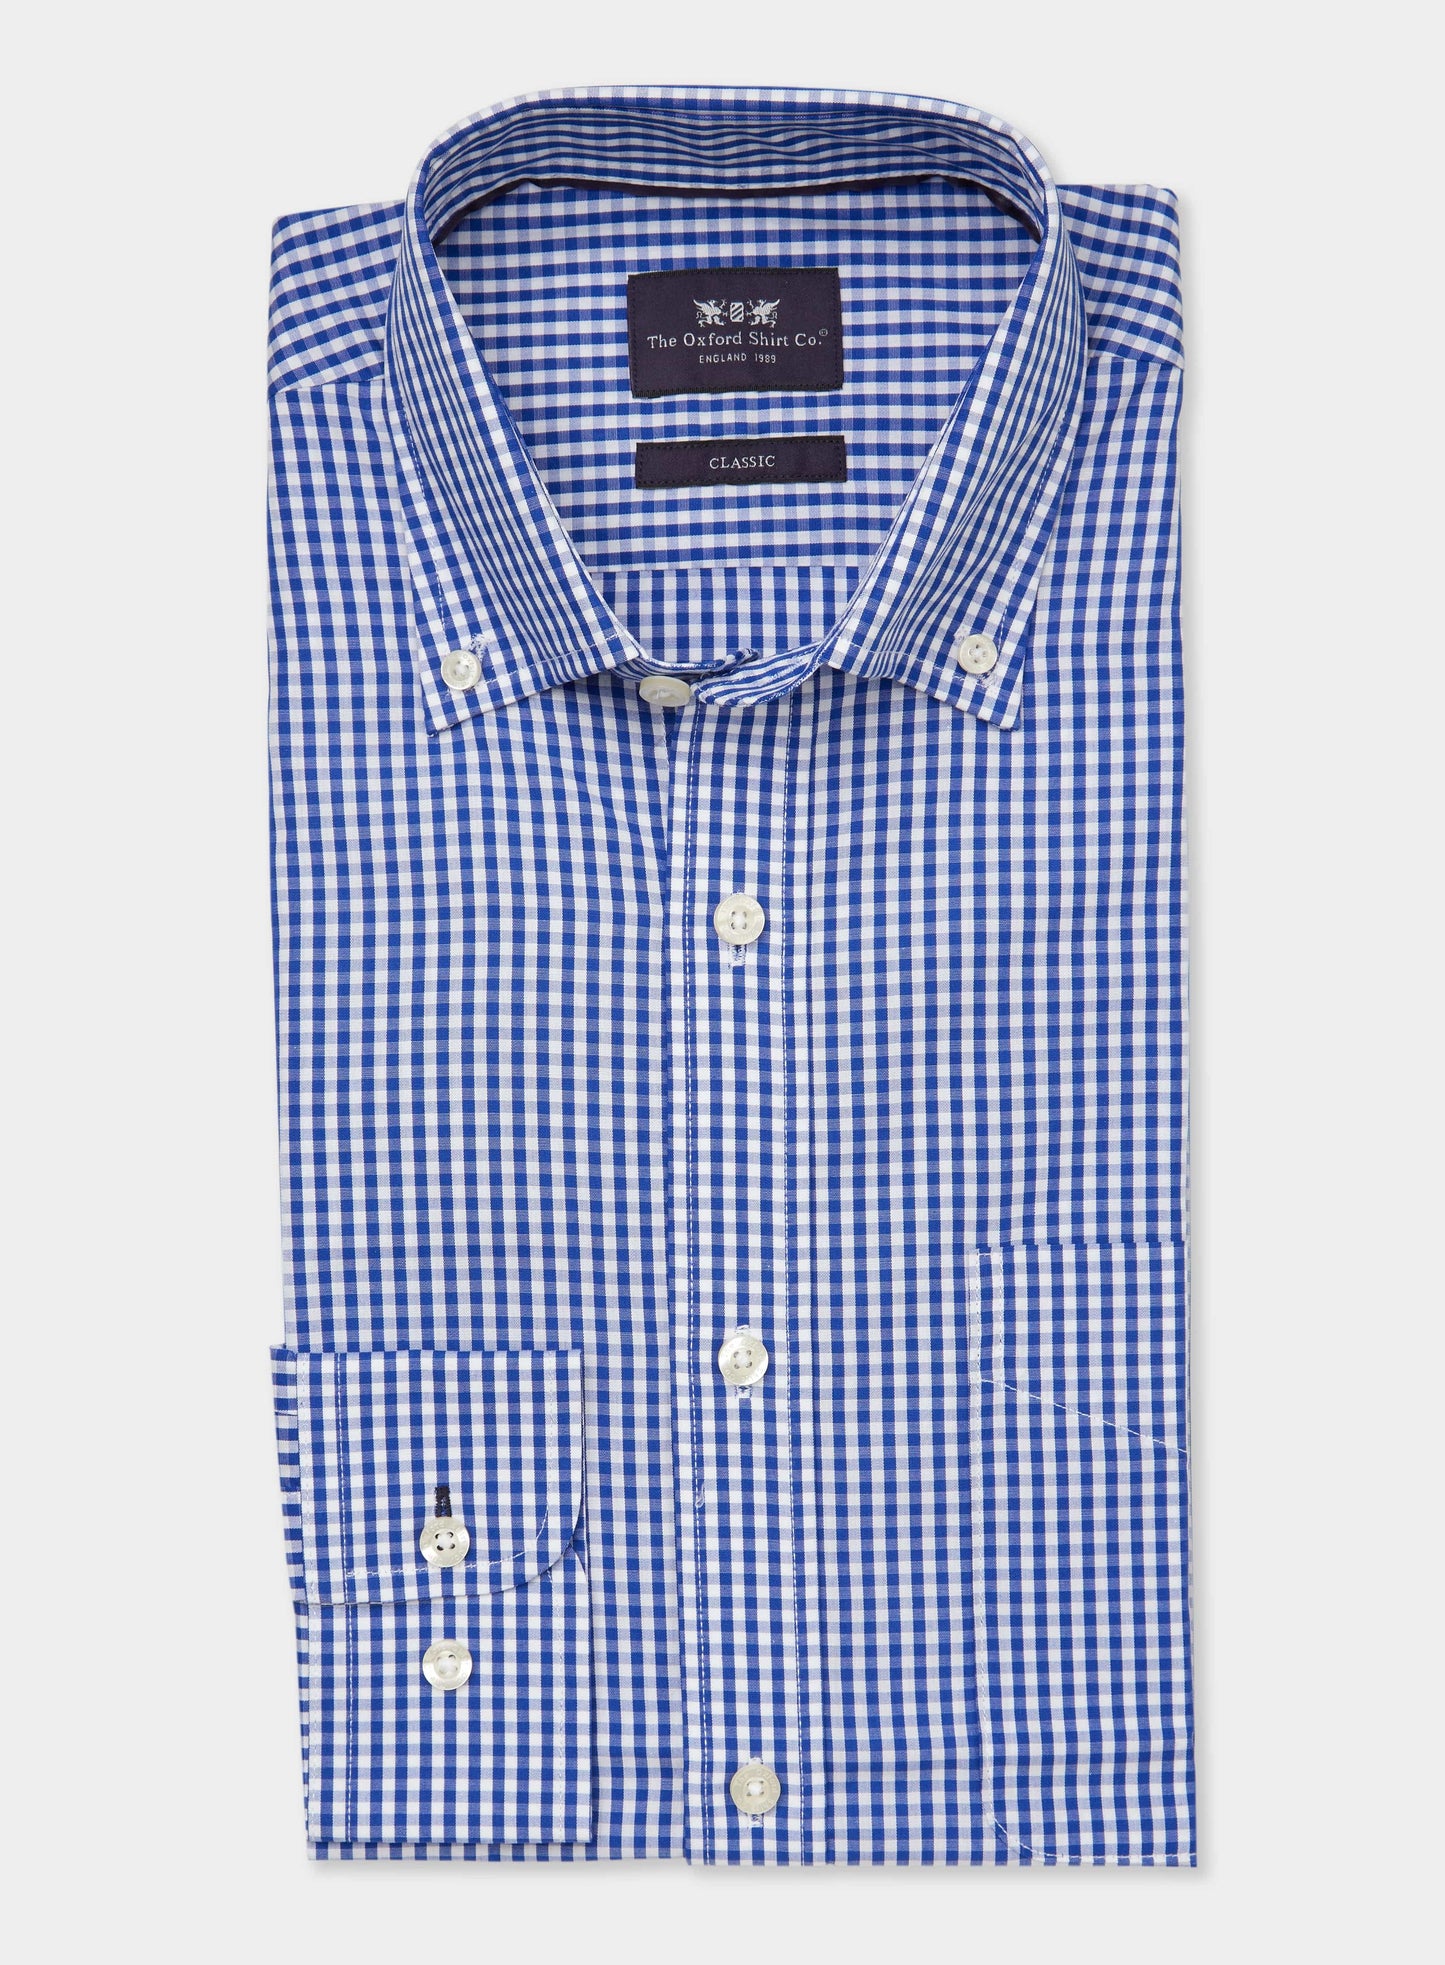 Button Down Shirt in Navy Gingham